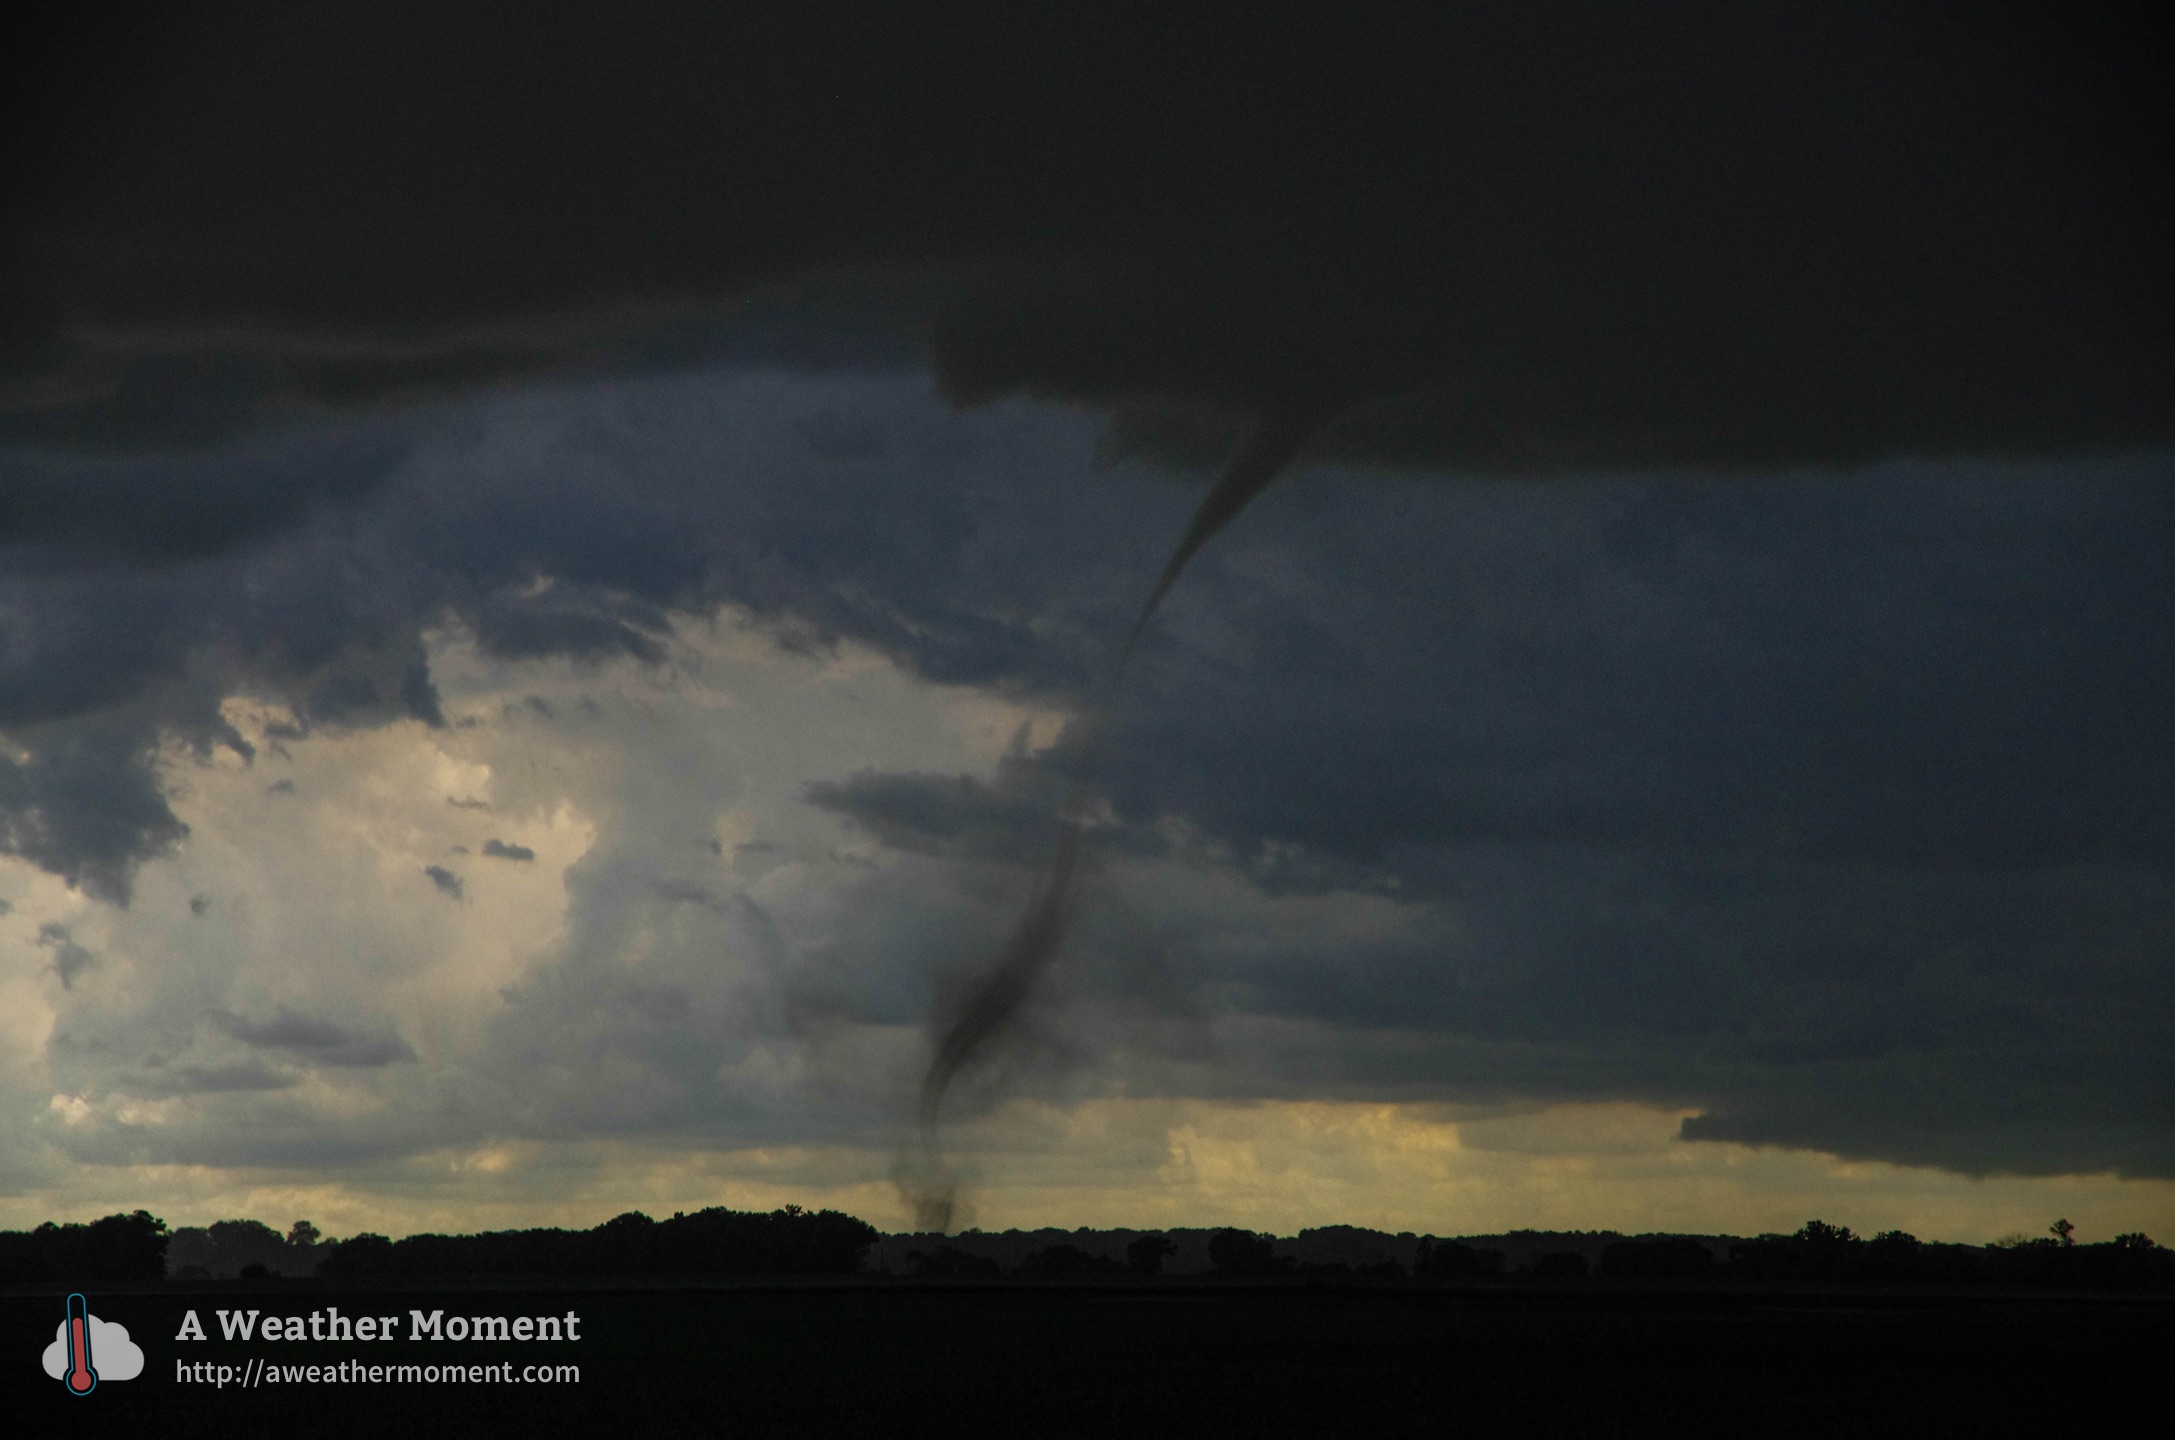 One of the rope tornadoes in ND observed near Pisek. (Source: Matt D)